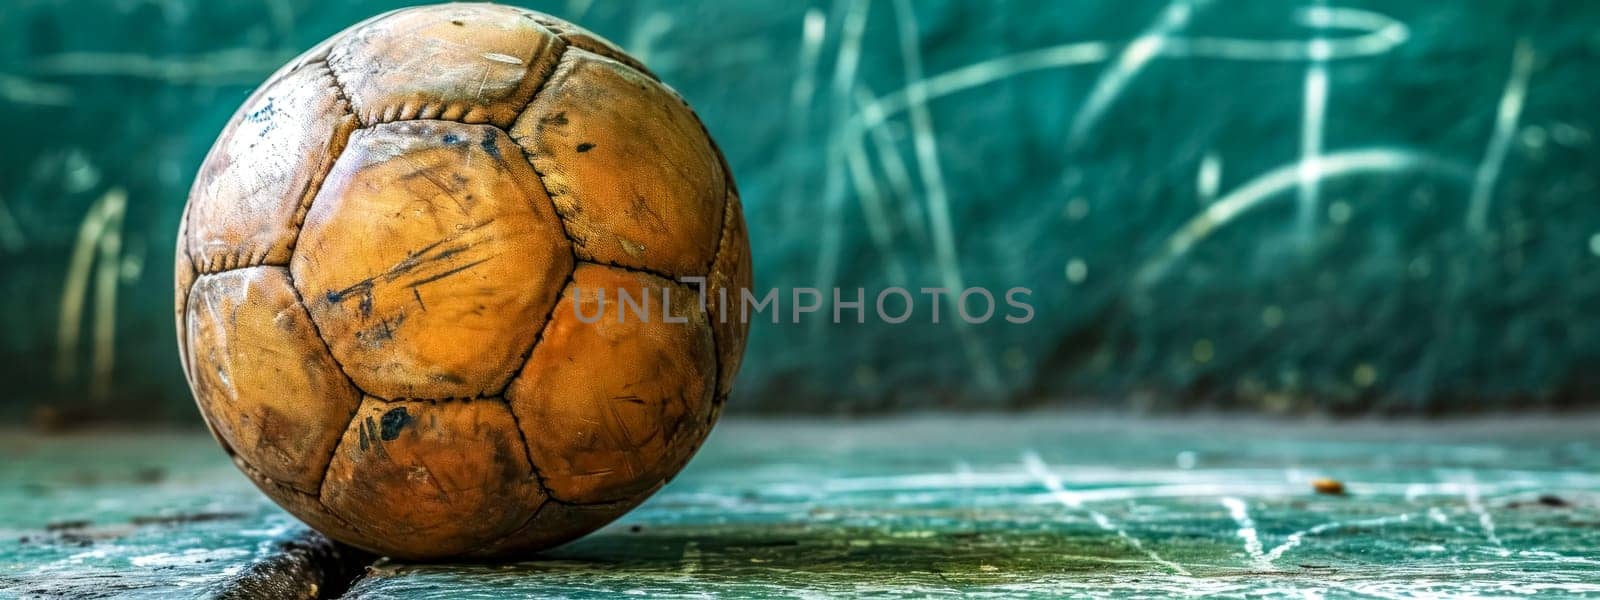 weathered and well-worn leather soccer ball, rich with texture and history, resting on a worn surface with a faded green background that suggests many games played and countless stories told